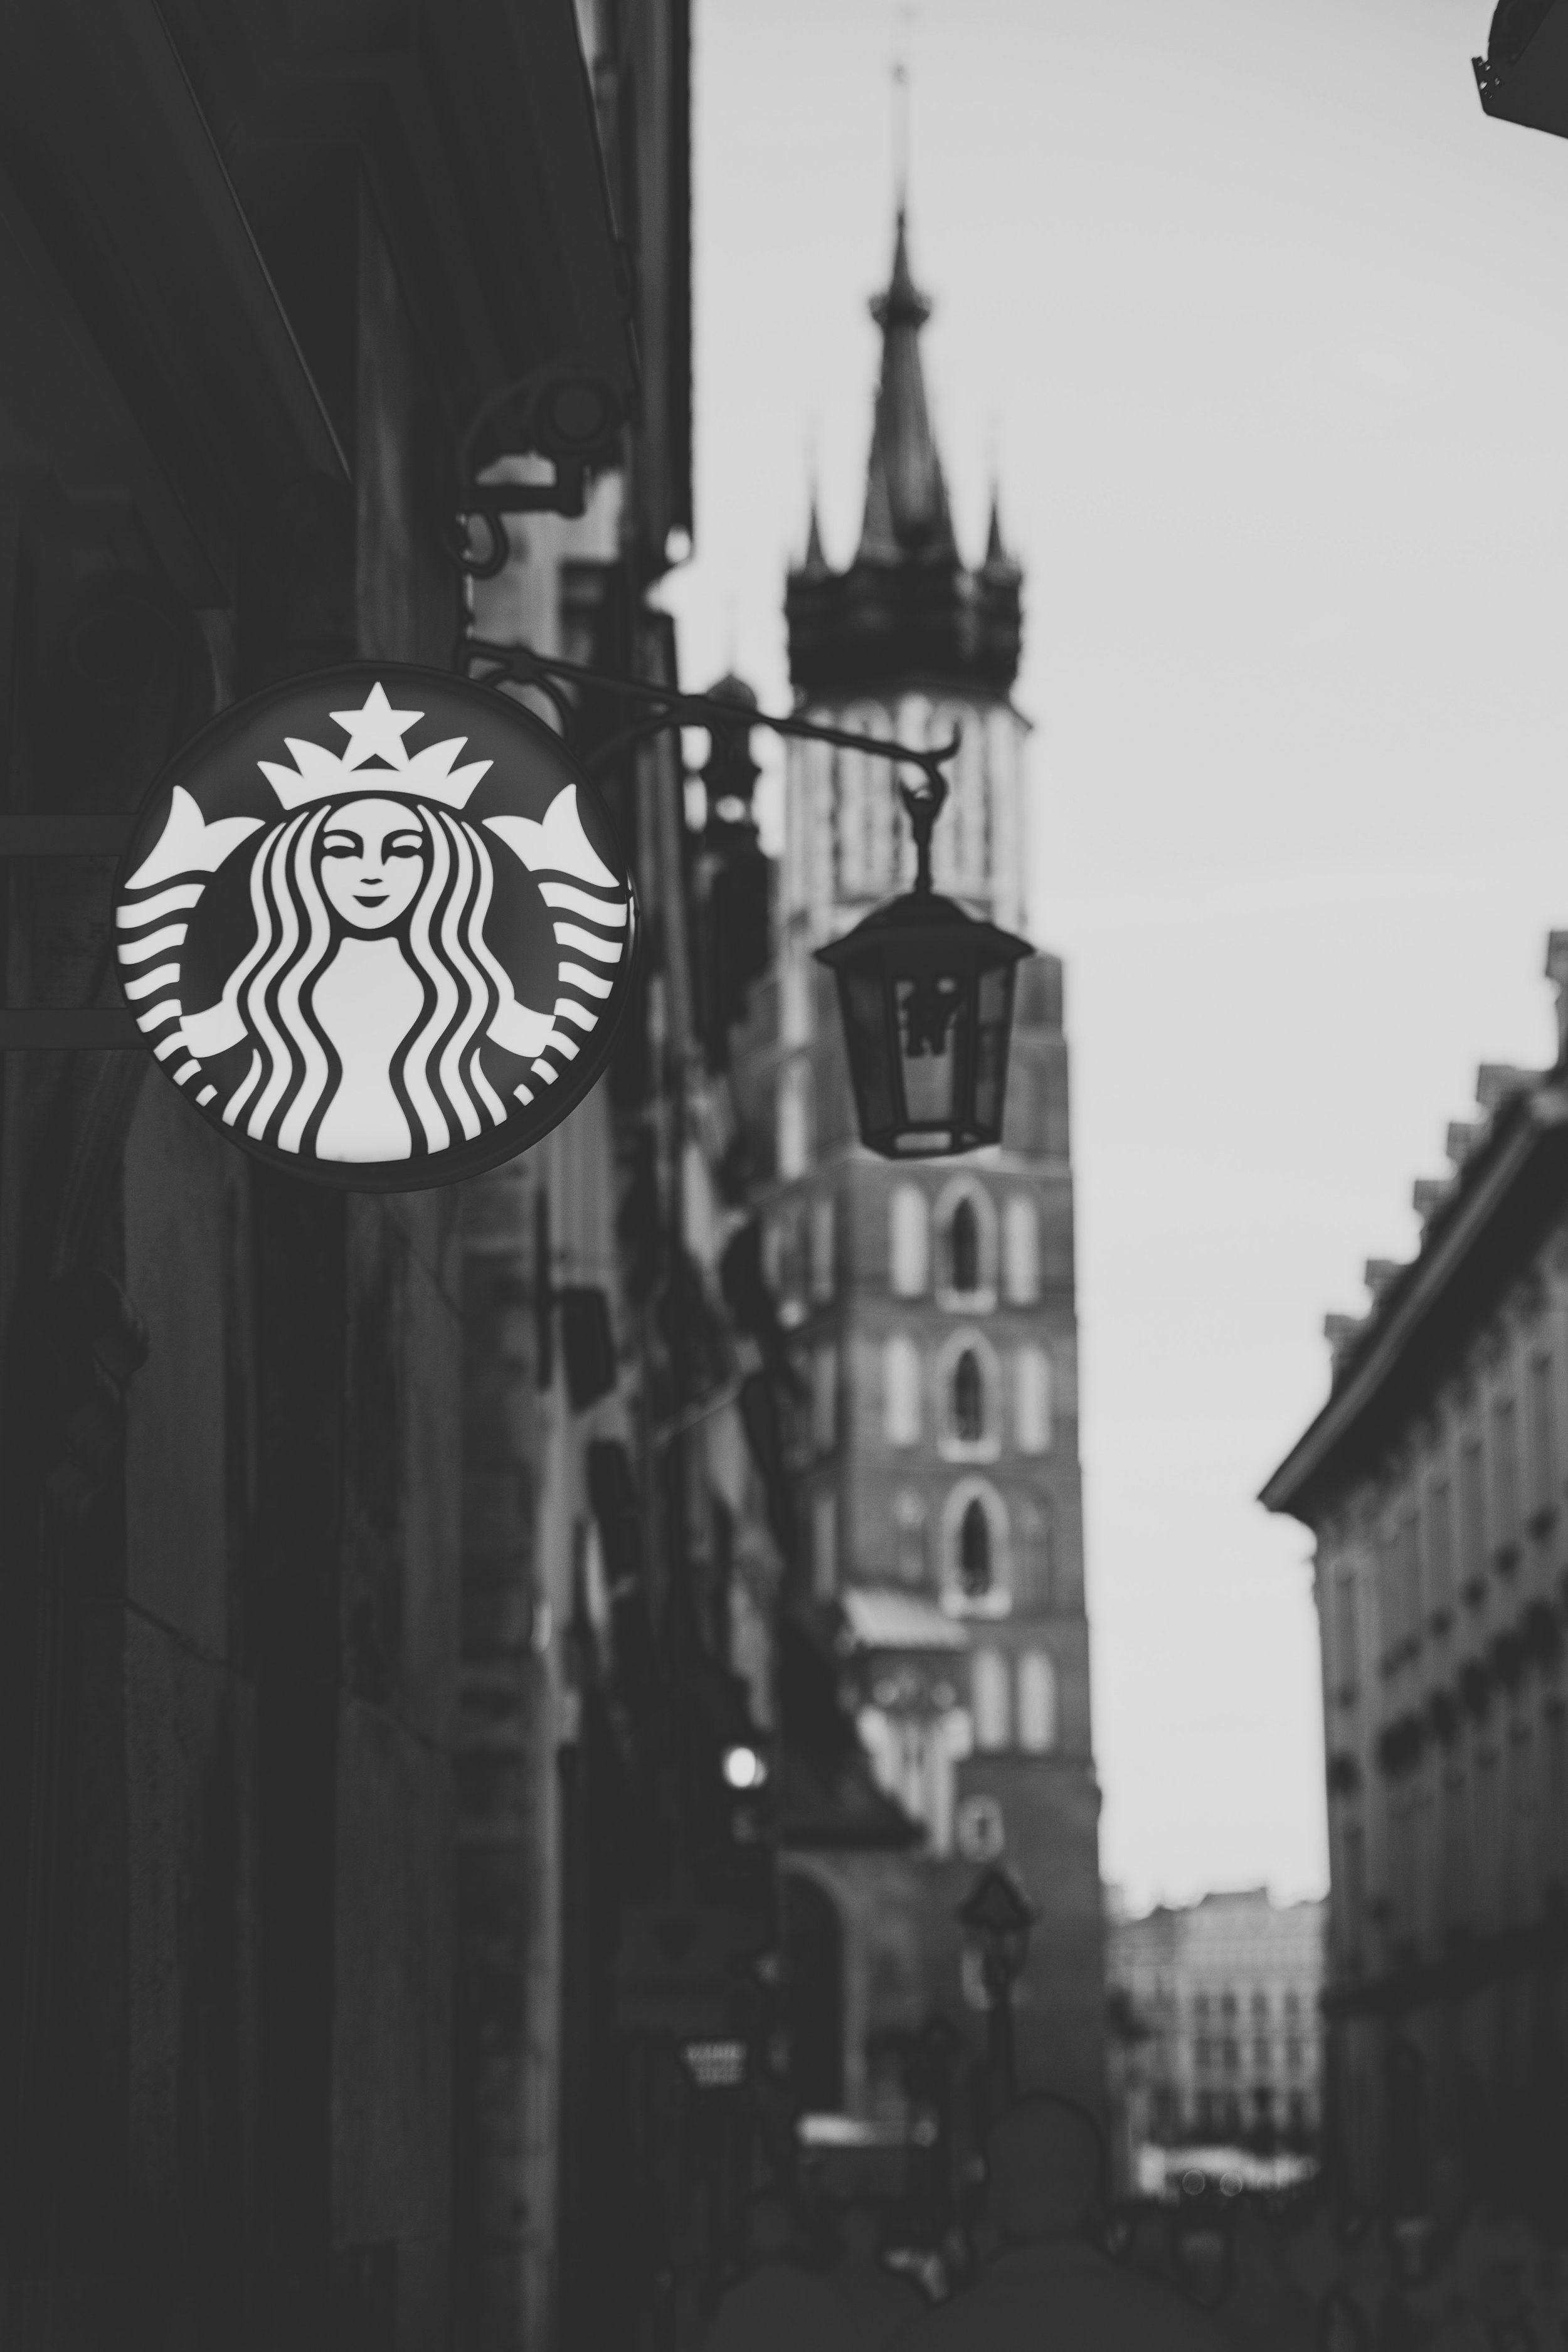 A Starbucks sign hangs in the foreground, with a medieval town out of focus behind